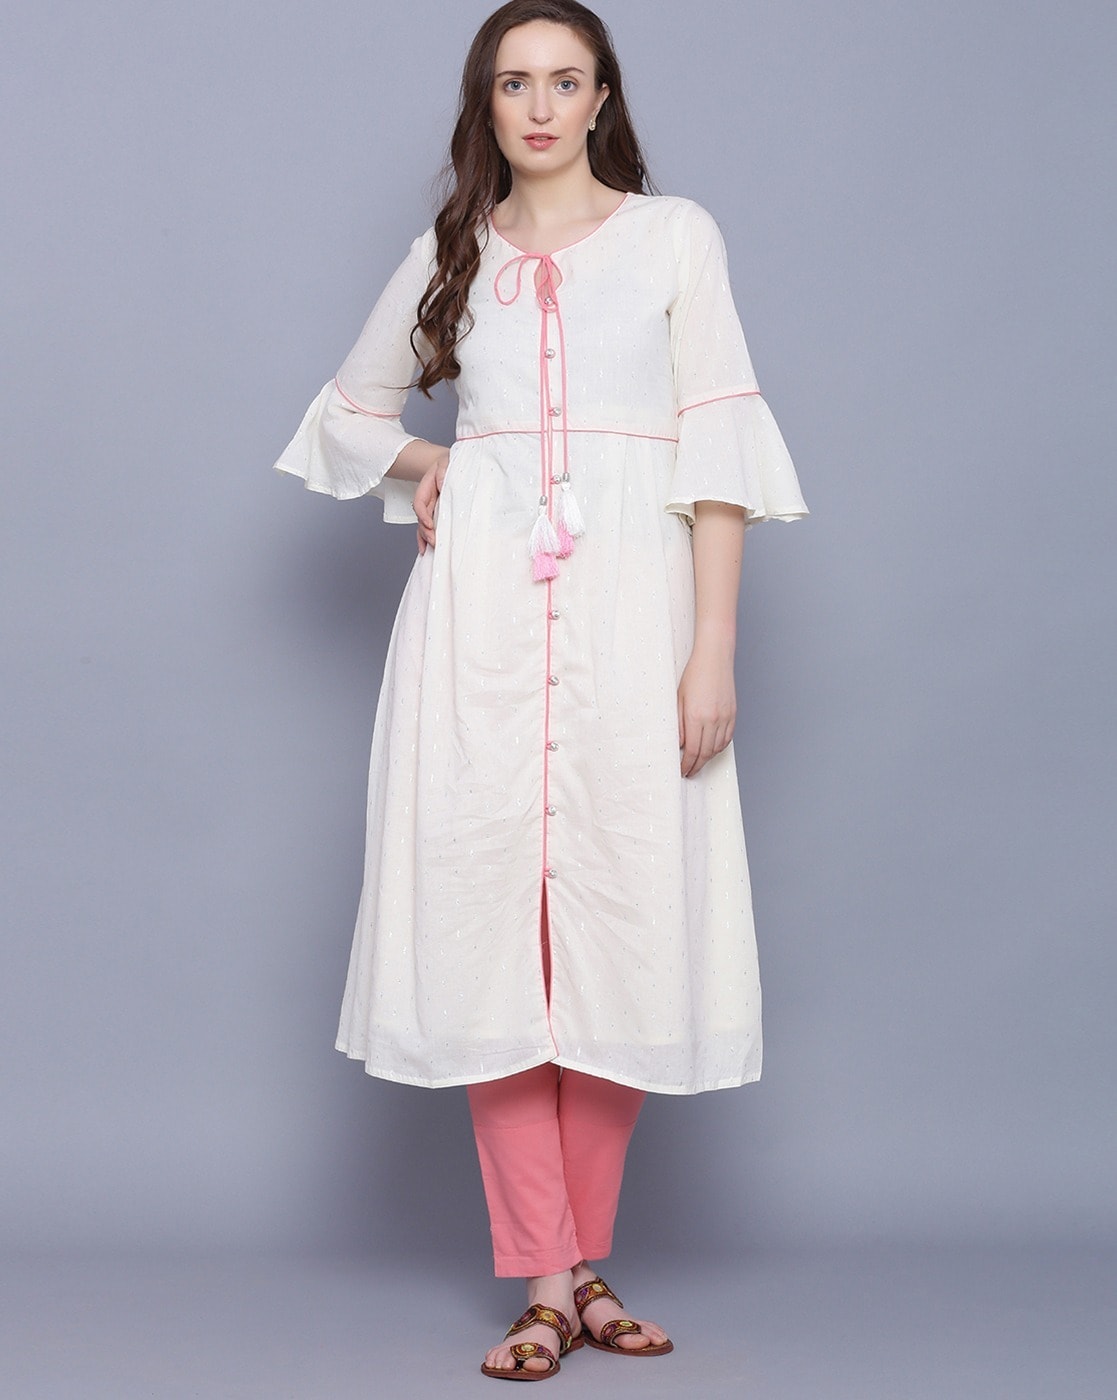 Aggregate more than 151 bell sleeves kurti super hot